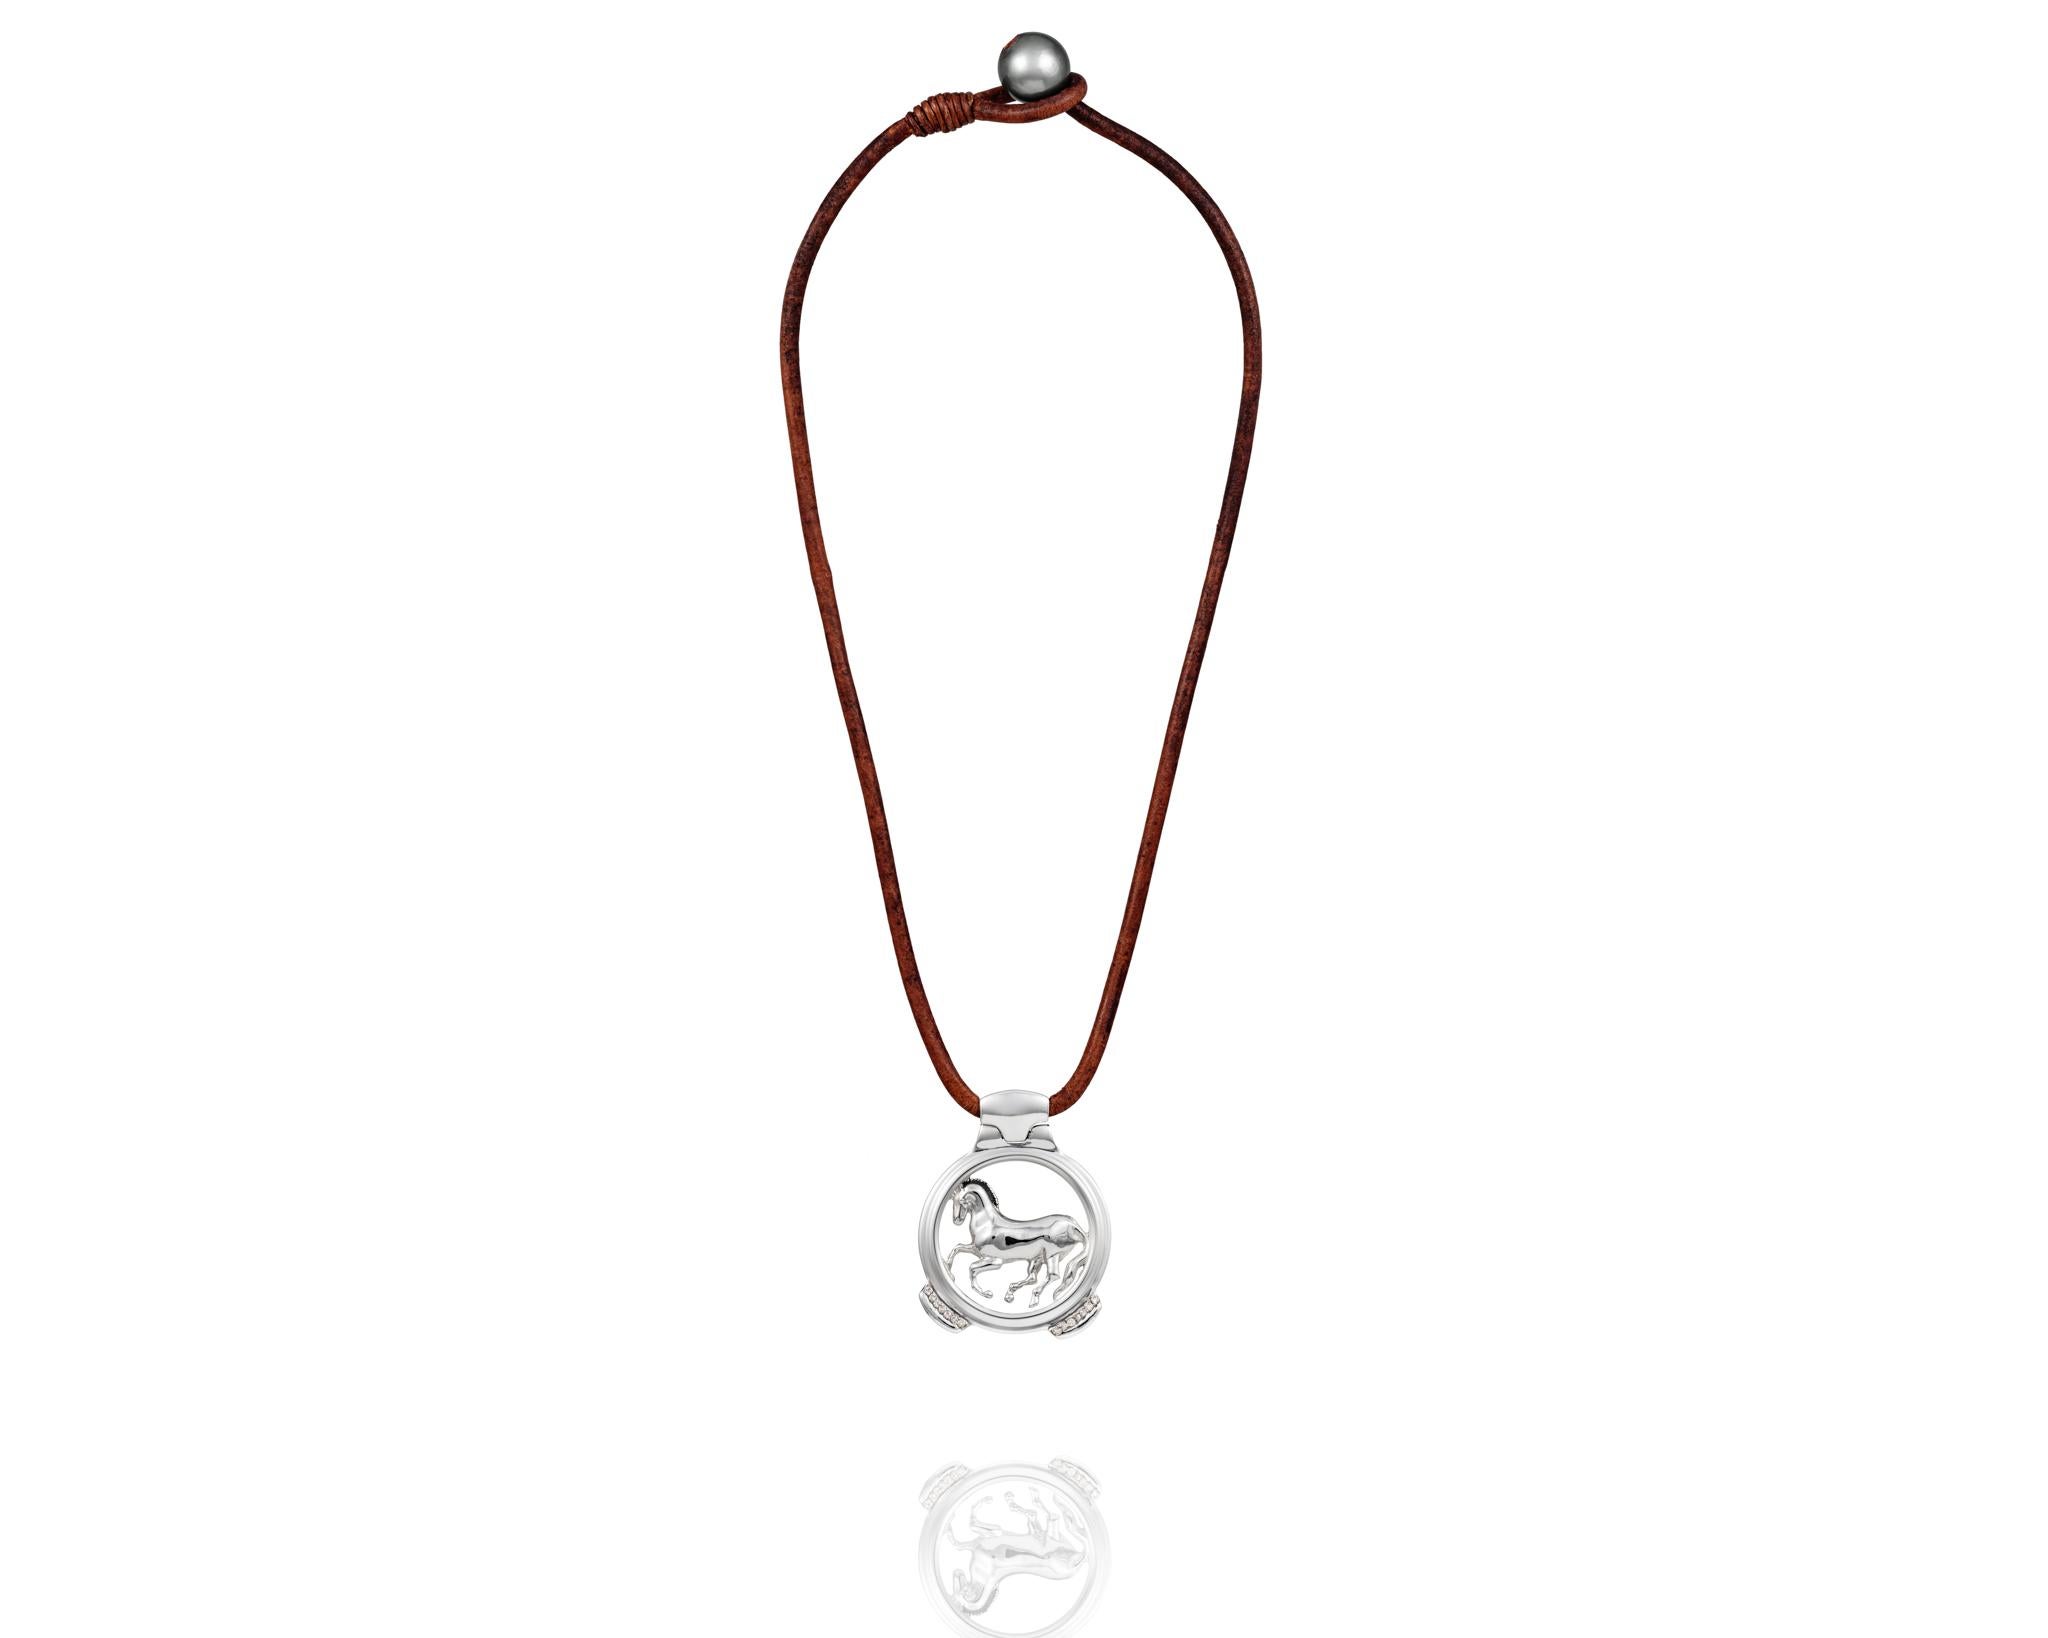 Part of the Vincent Peach Equestrian Collection, the Finnhorse Necklace has our signature Sterling Silver Horse Pendant on a Premium Leather Cord with a Luxurious Tahitian Pearl Clasp. This necklace comes in the Standard 17